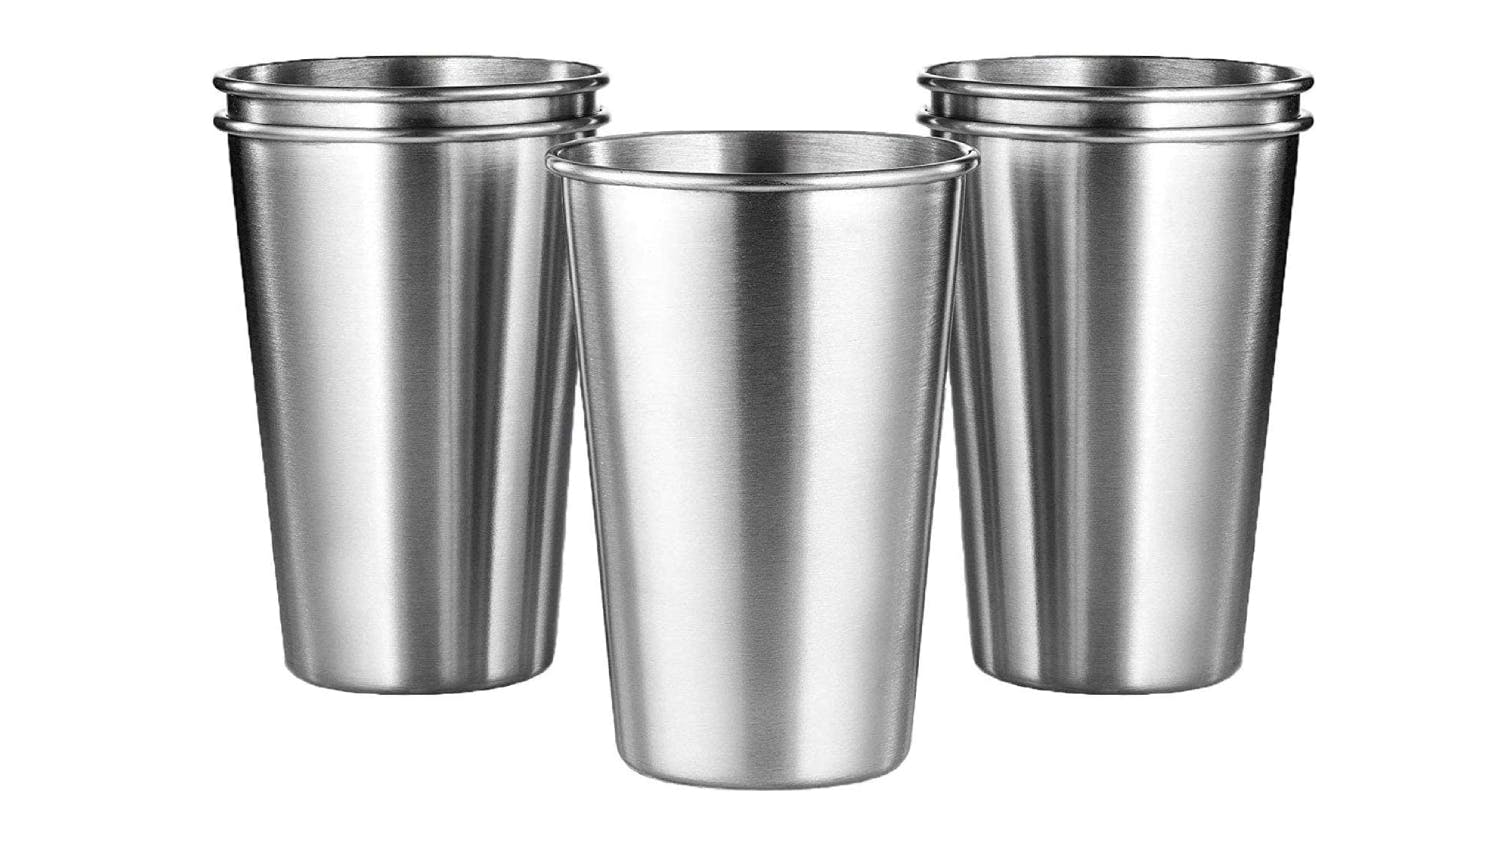 Kmall Stainless Steel Pint Cups 5pcs.